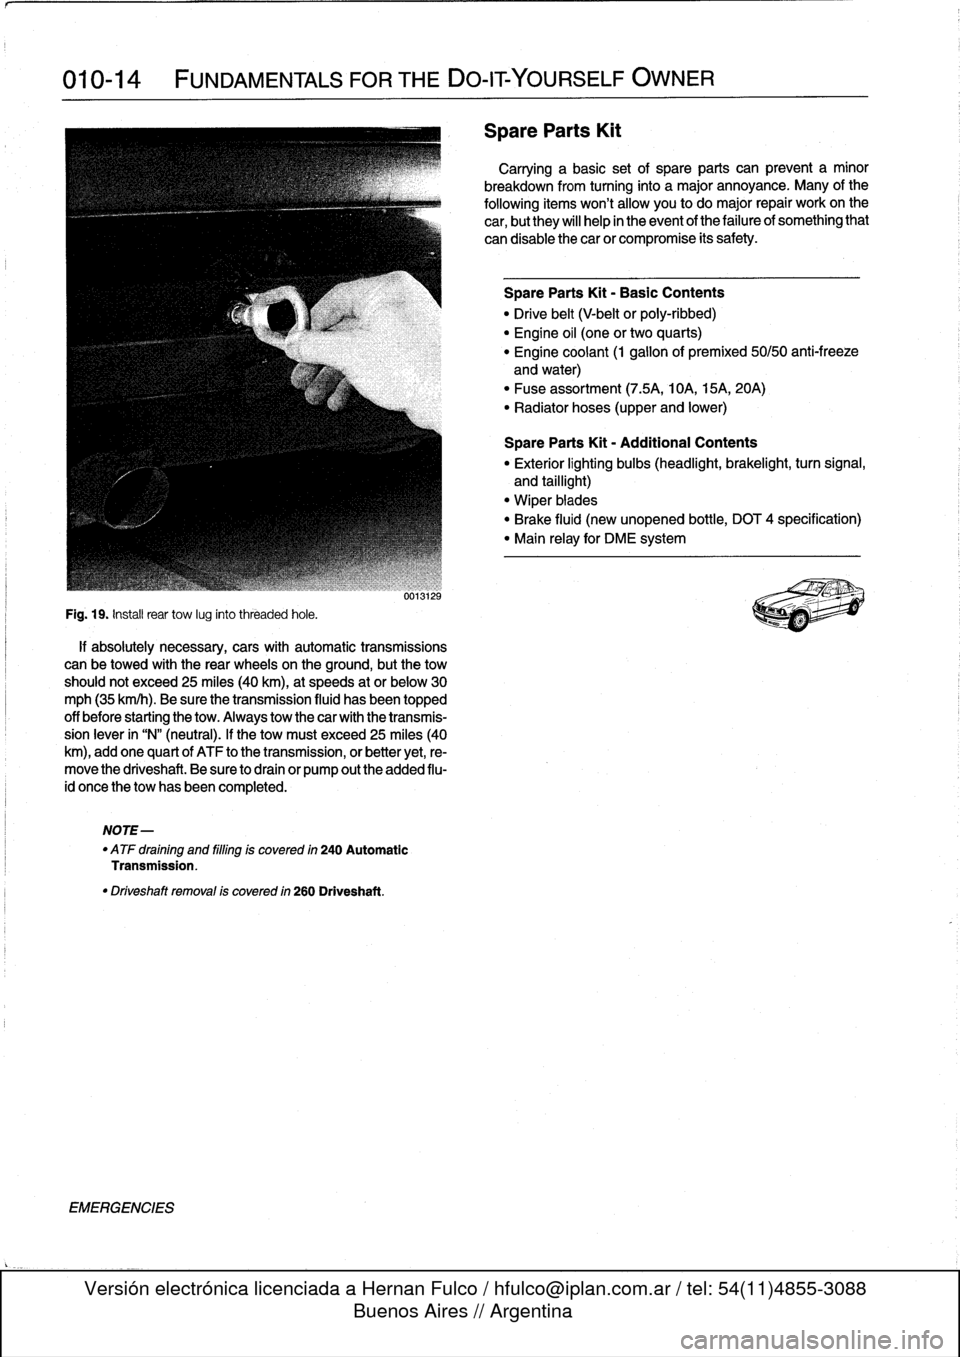 BMW 328i 1995 E36 Workshop Manual 
010-14

	

FUNDAMENTALS
FOR
THE
DO-ITYOURSELF
OWNER

Fig
.
19
.
Instaf
rear
tow
lug
into
threaded
hole
.

if
absolutely
necessary,
cars
with
automatic
transmissions
can
be
towed
with
the
rear
wheels
